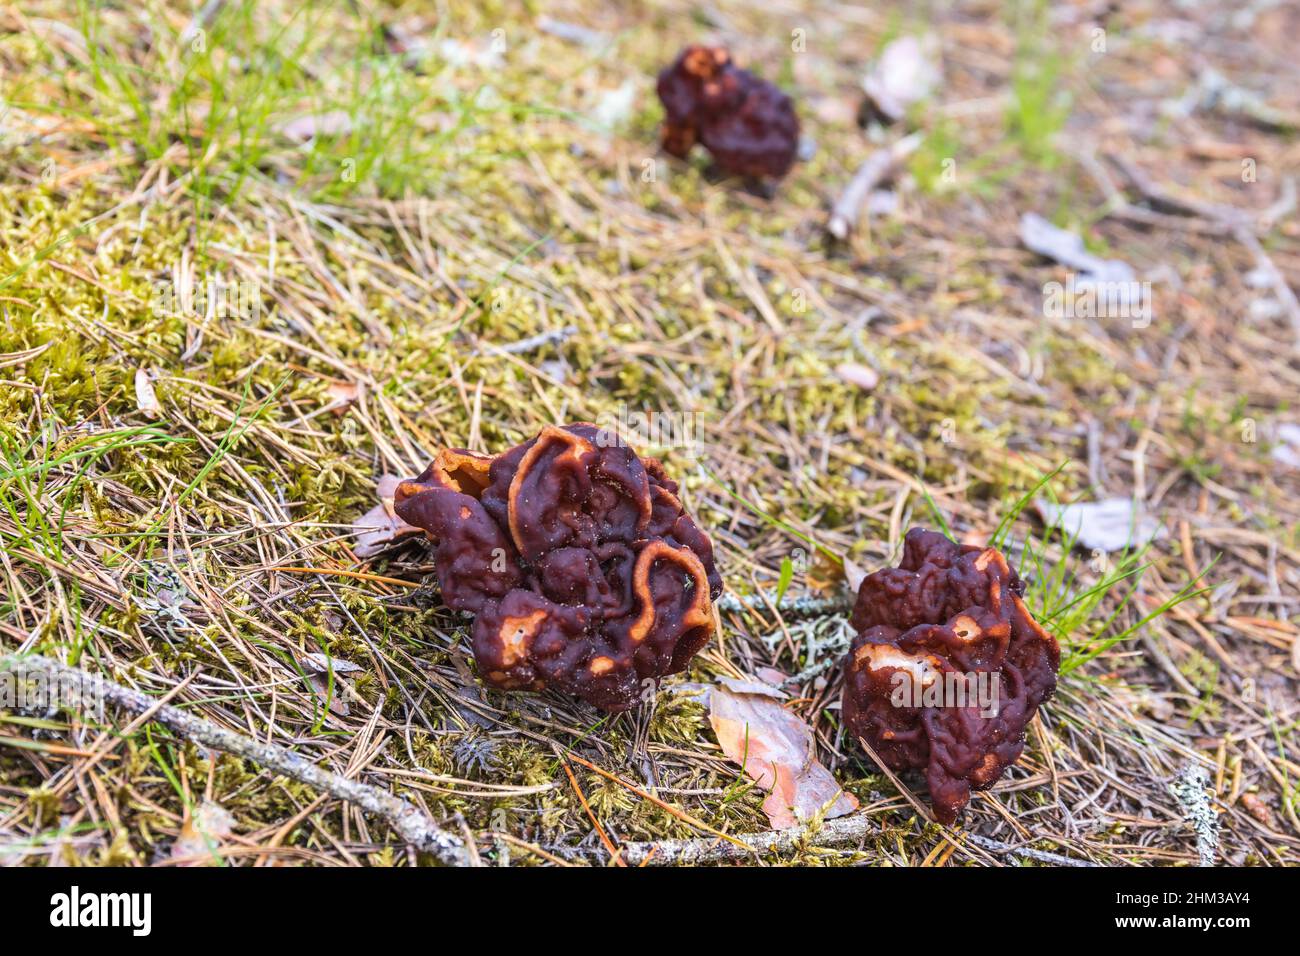 Gyromitra esculenta fungus on the forest floor Stock Photo